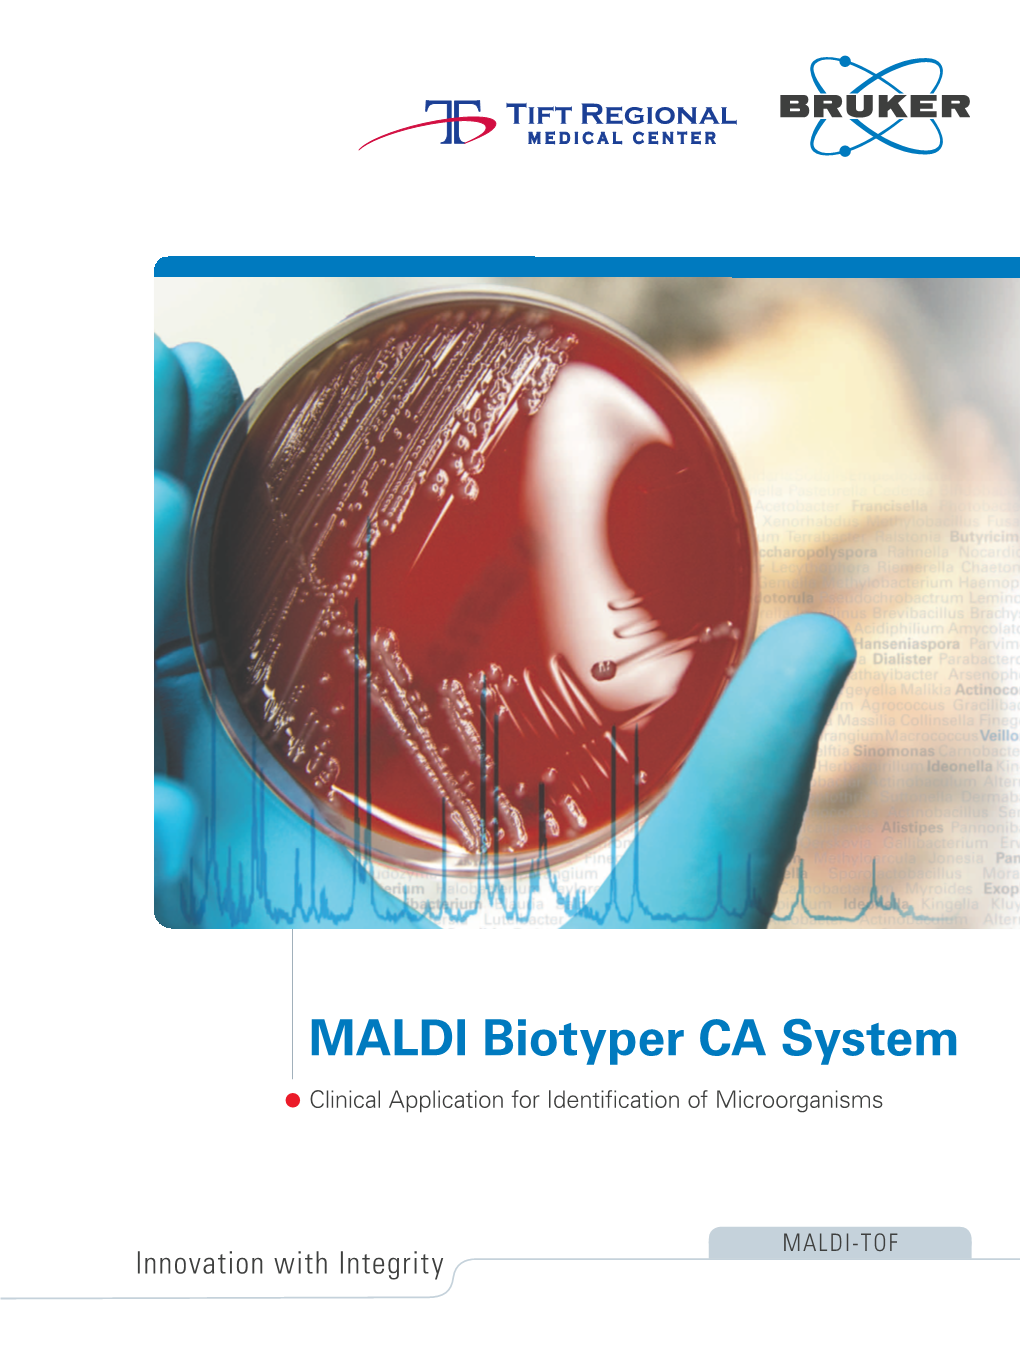 MALDI Biotyper CA System Clinical Application for Identification of Microorganisms